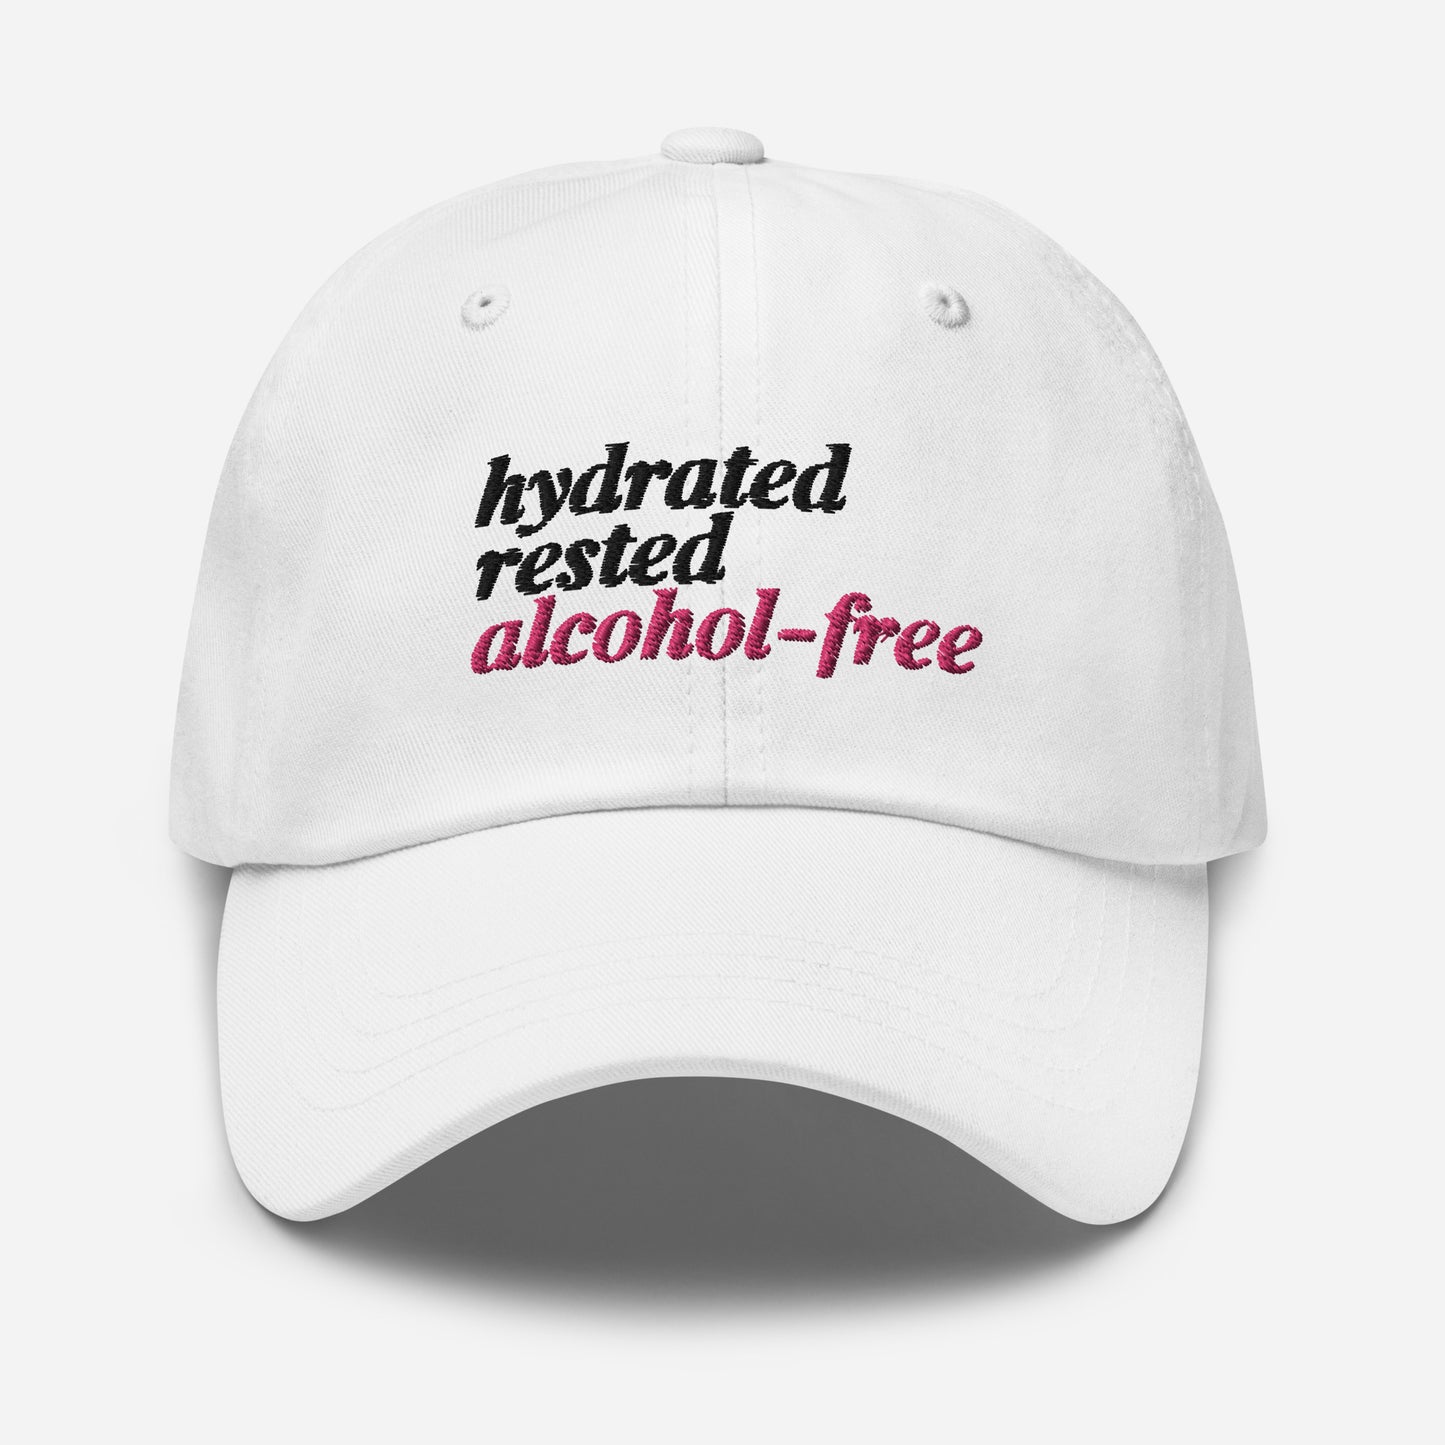 Hydrated, Rested + Alcohol-Free hat